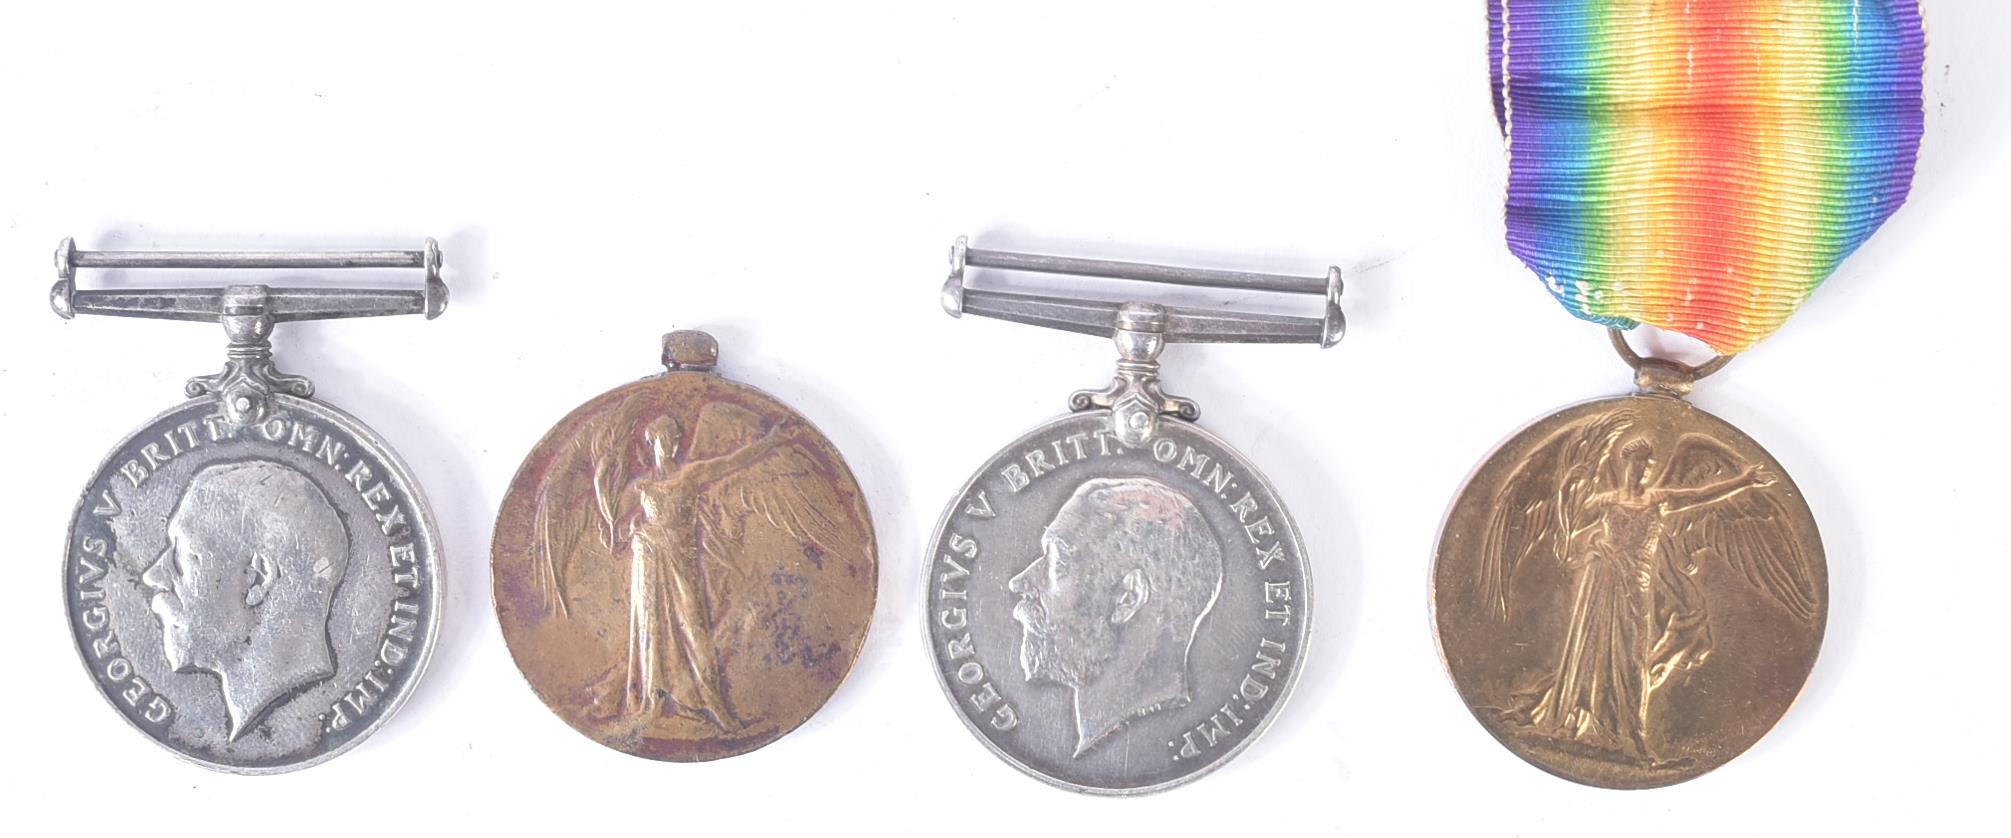 COLLECTION OF WWI FIRST WORLD WAR CAMPAIGN MEDALS